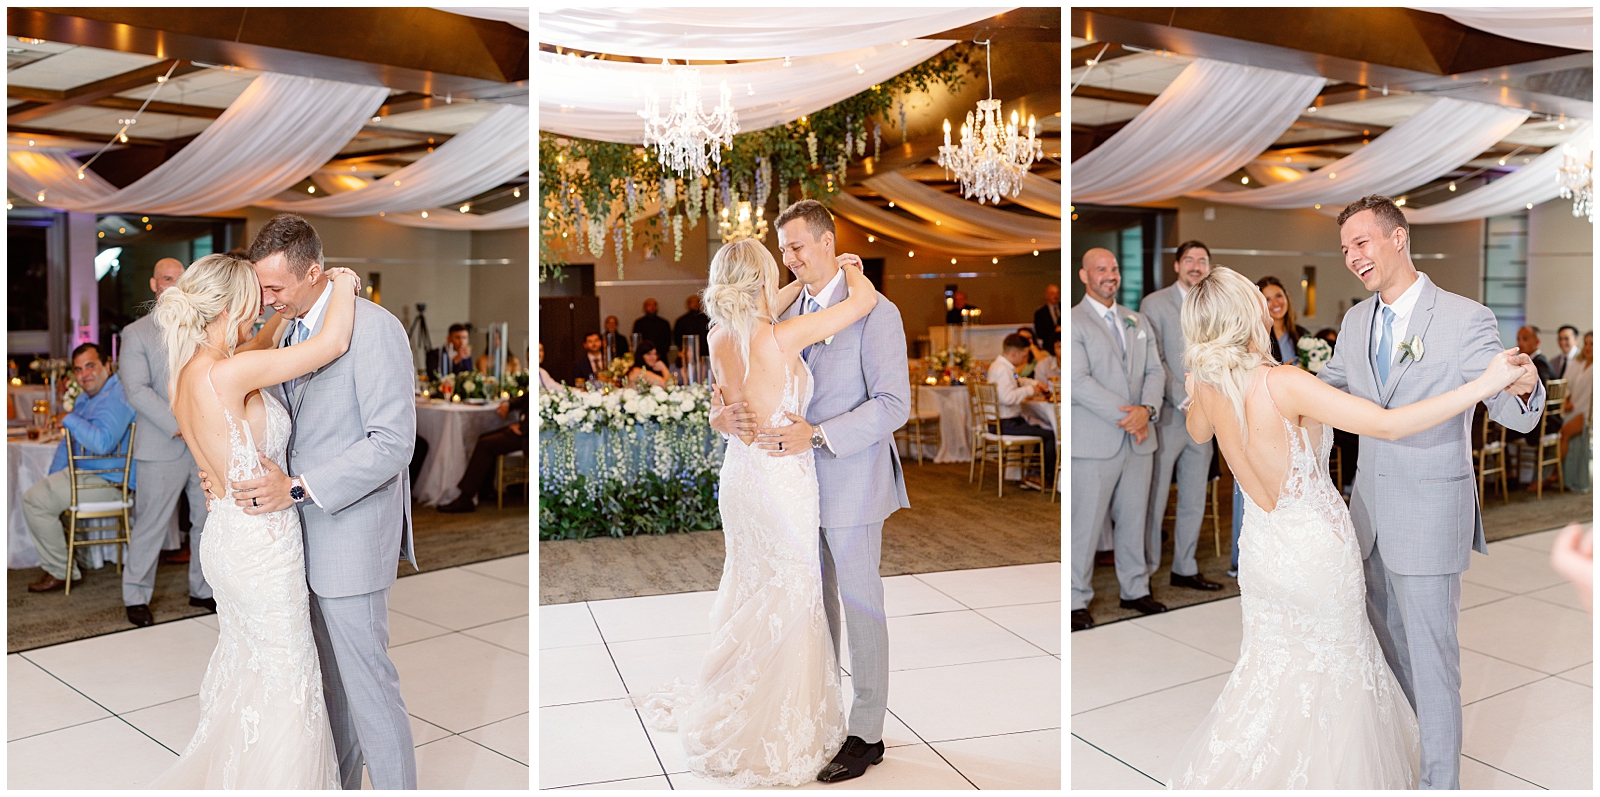 Marie Selby Gardens Florida Wedding - Bride and Groom's First Dance